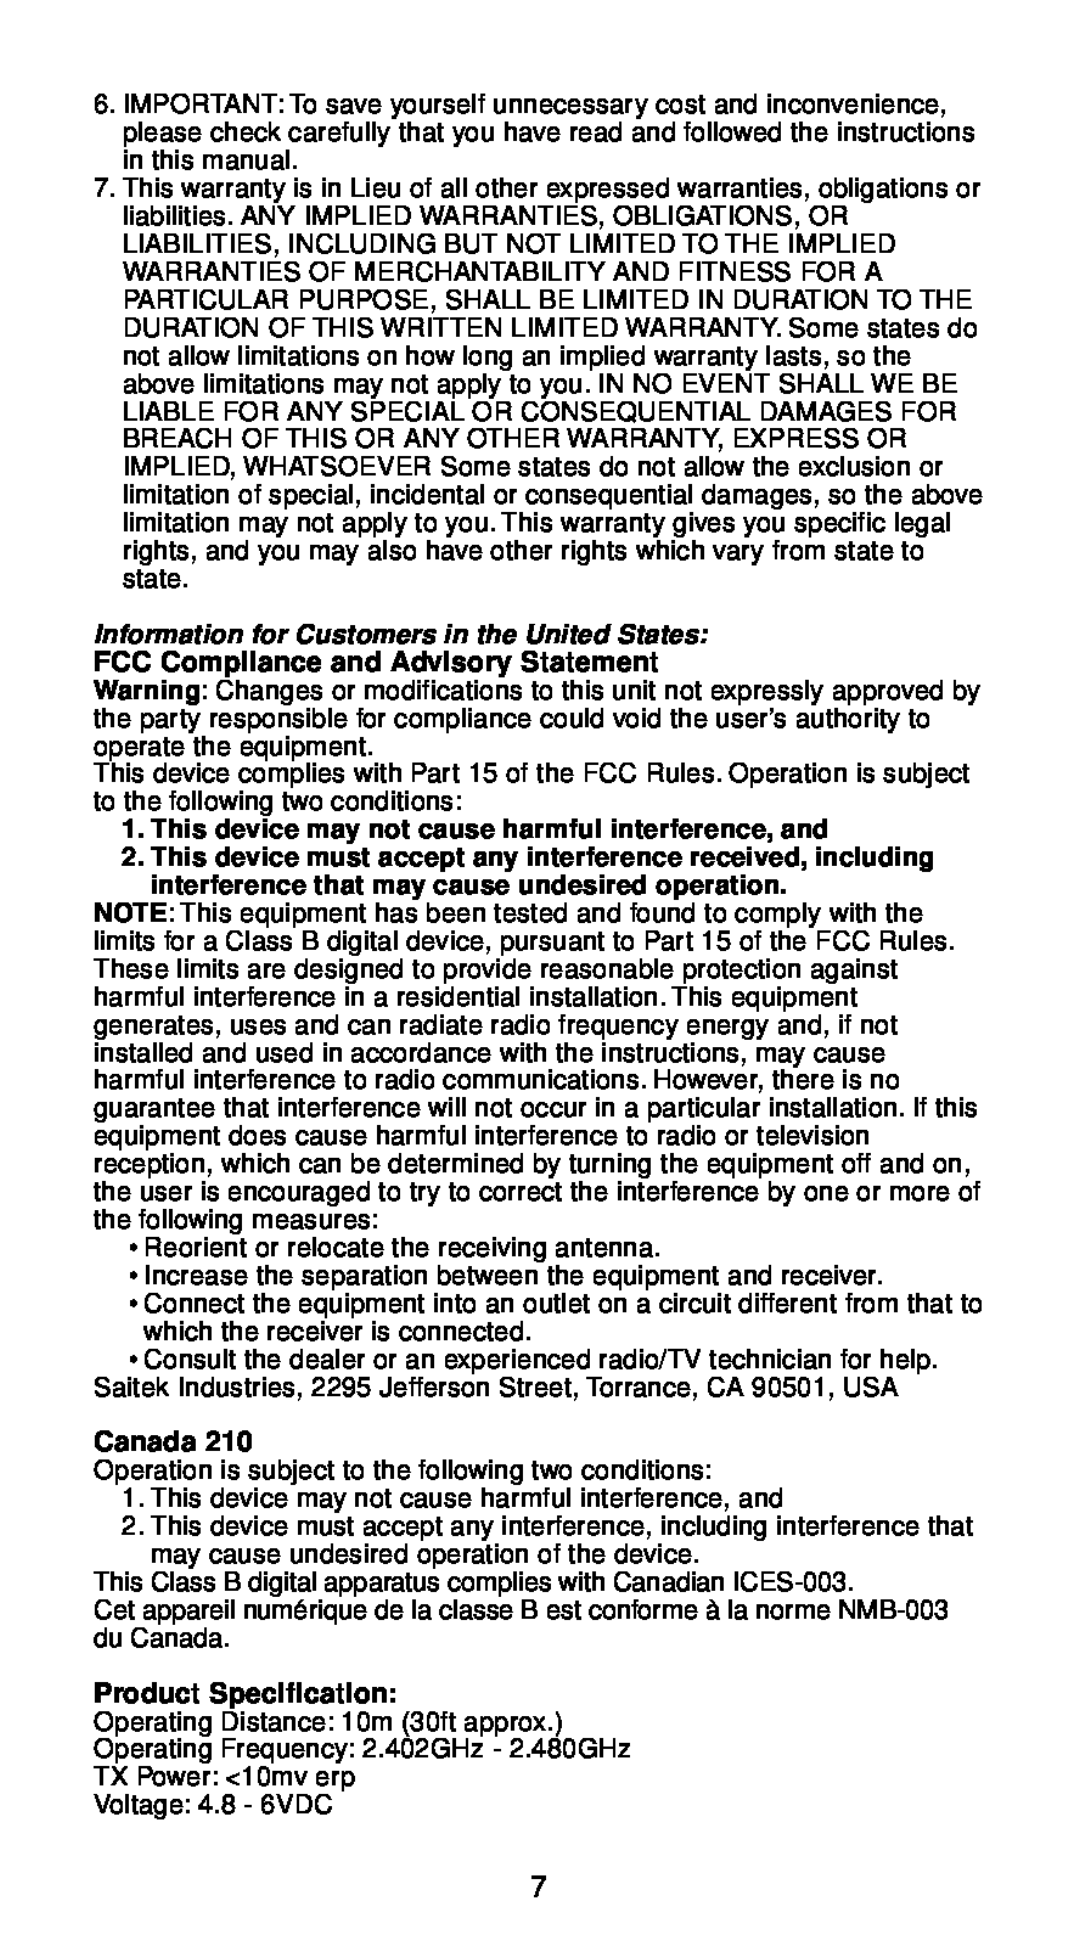 Saitek Wireless Adapter Information for Customers in the United States, FCC Compliance and Advisory Statement, Canada 